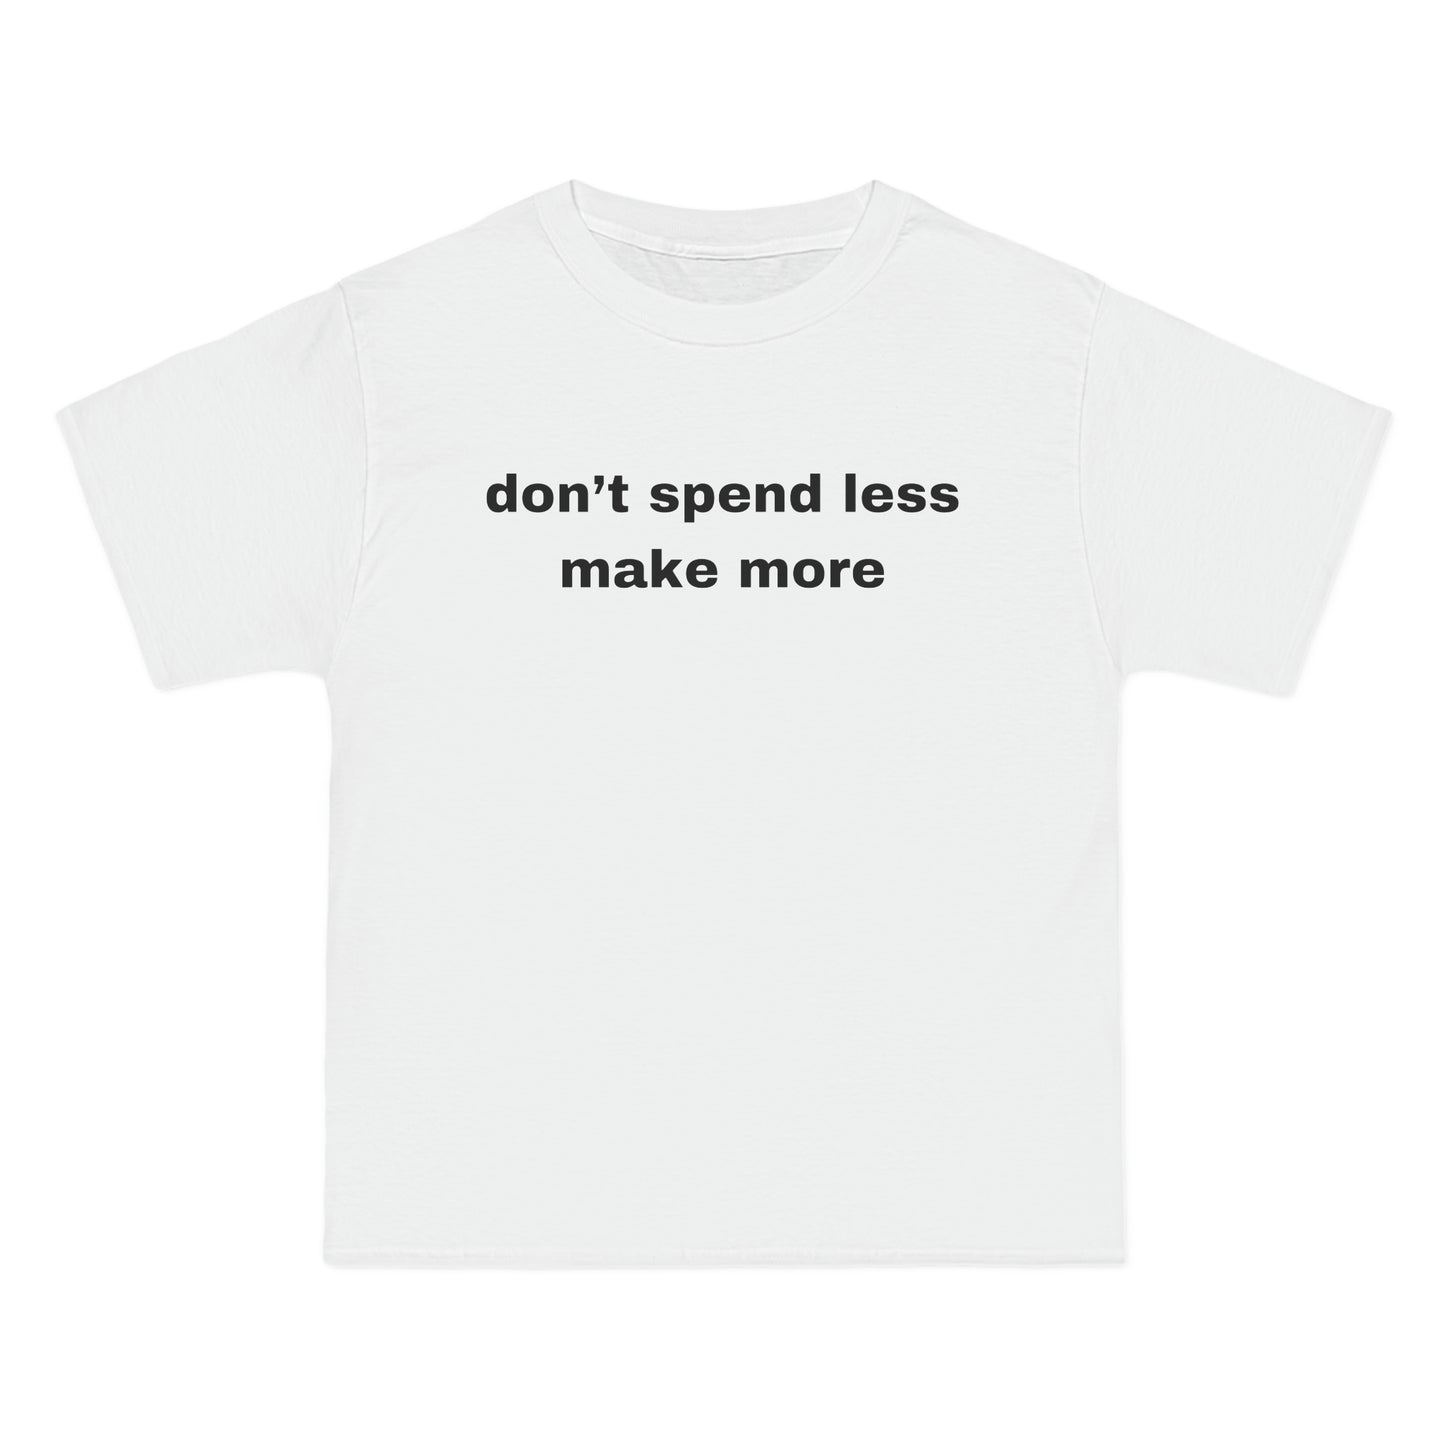 don’t spend less make more Tee